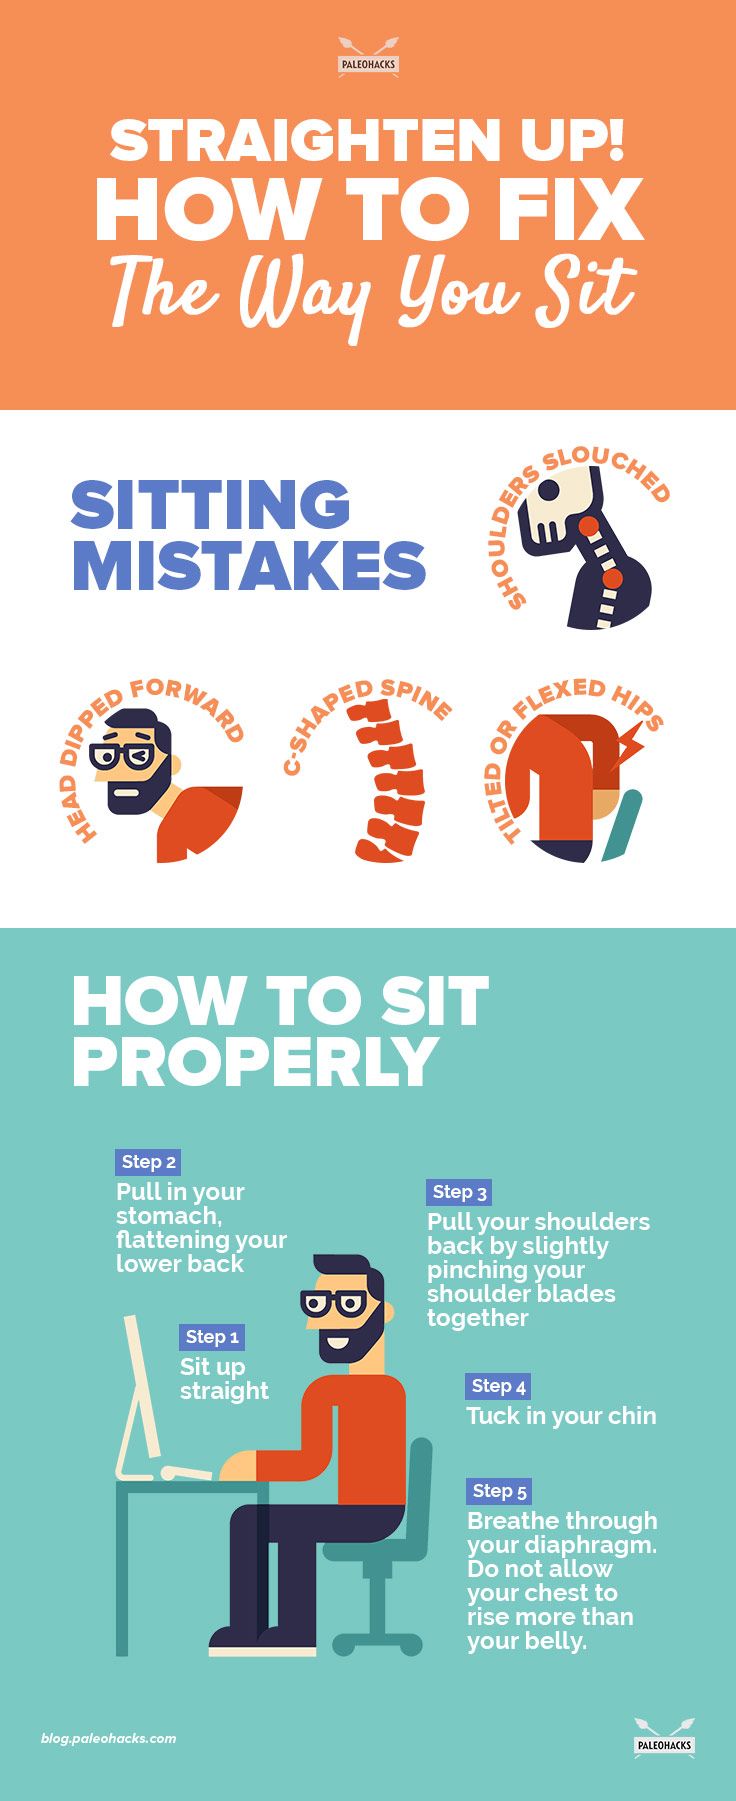 fix the way you sit infographic